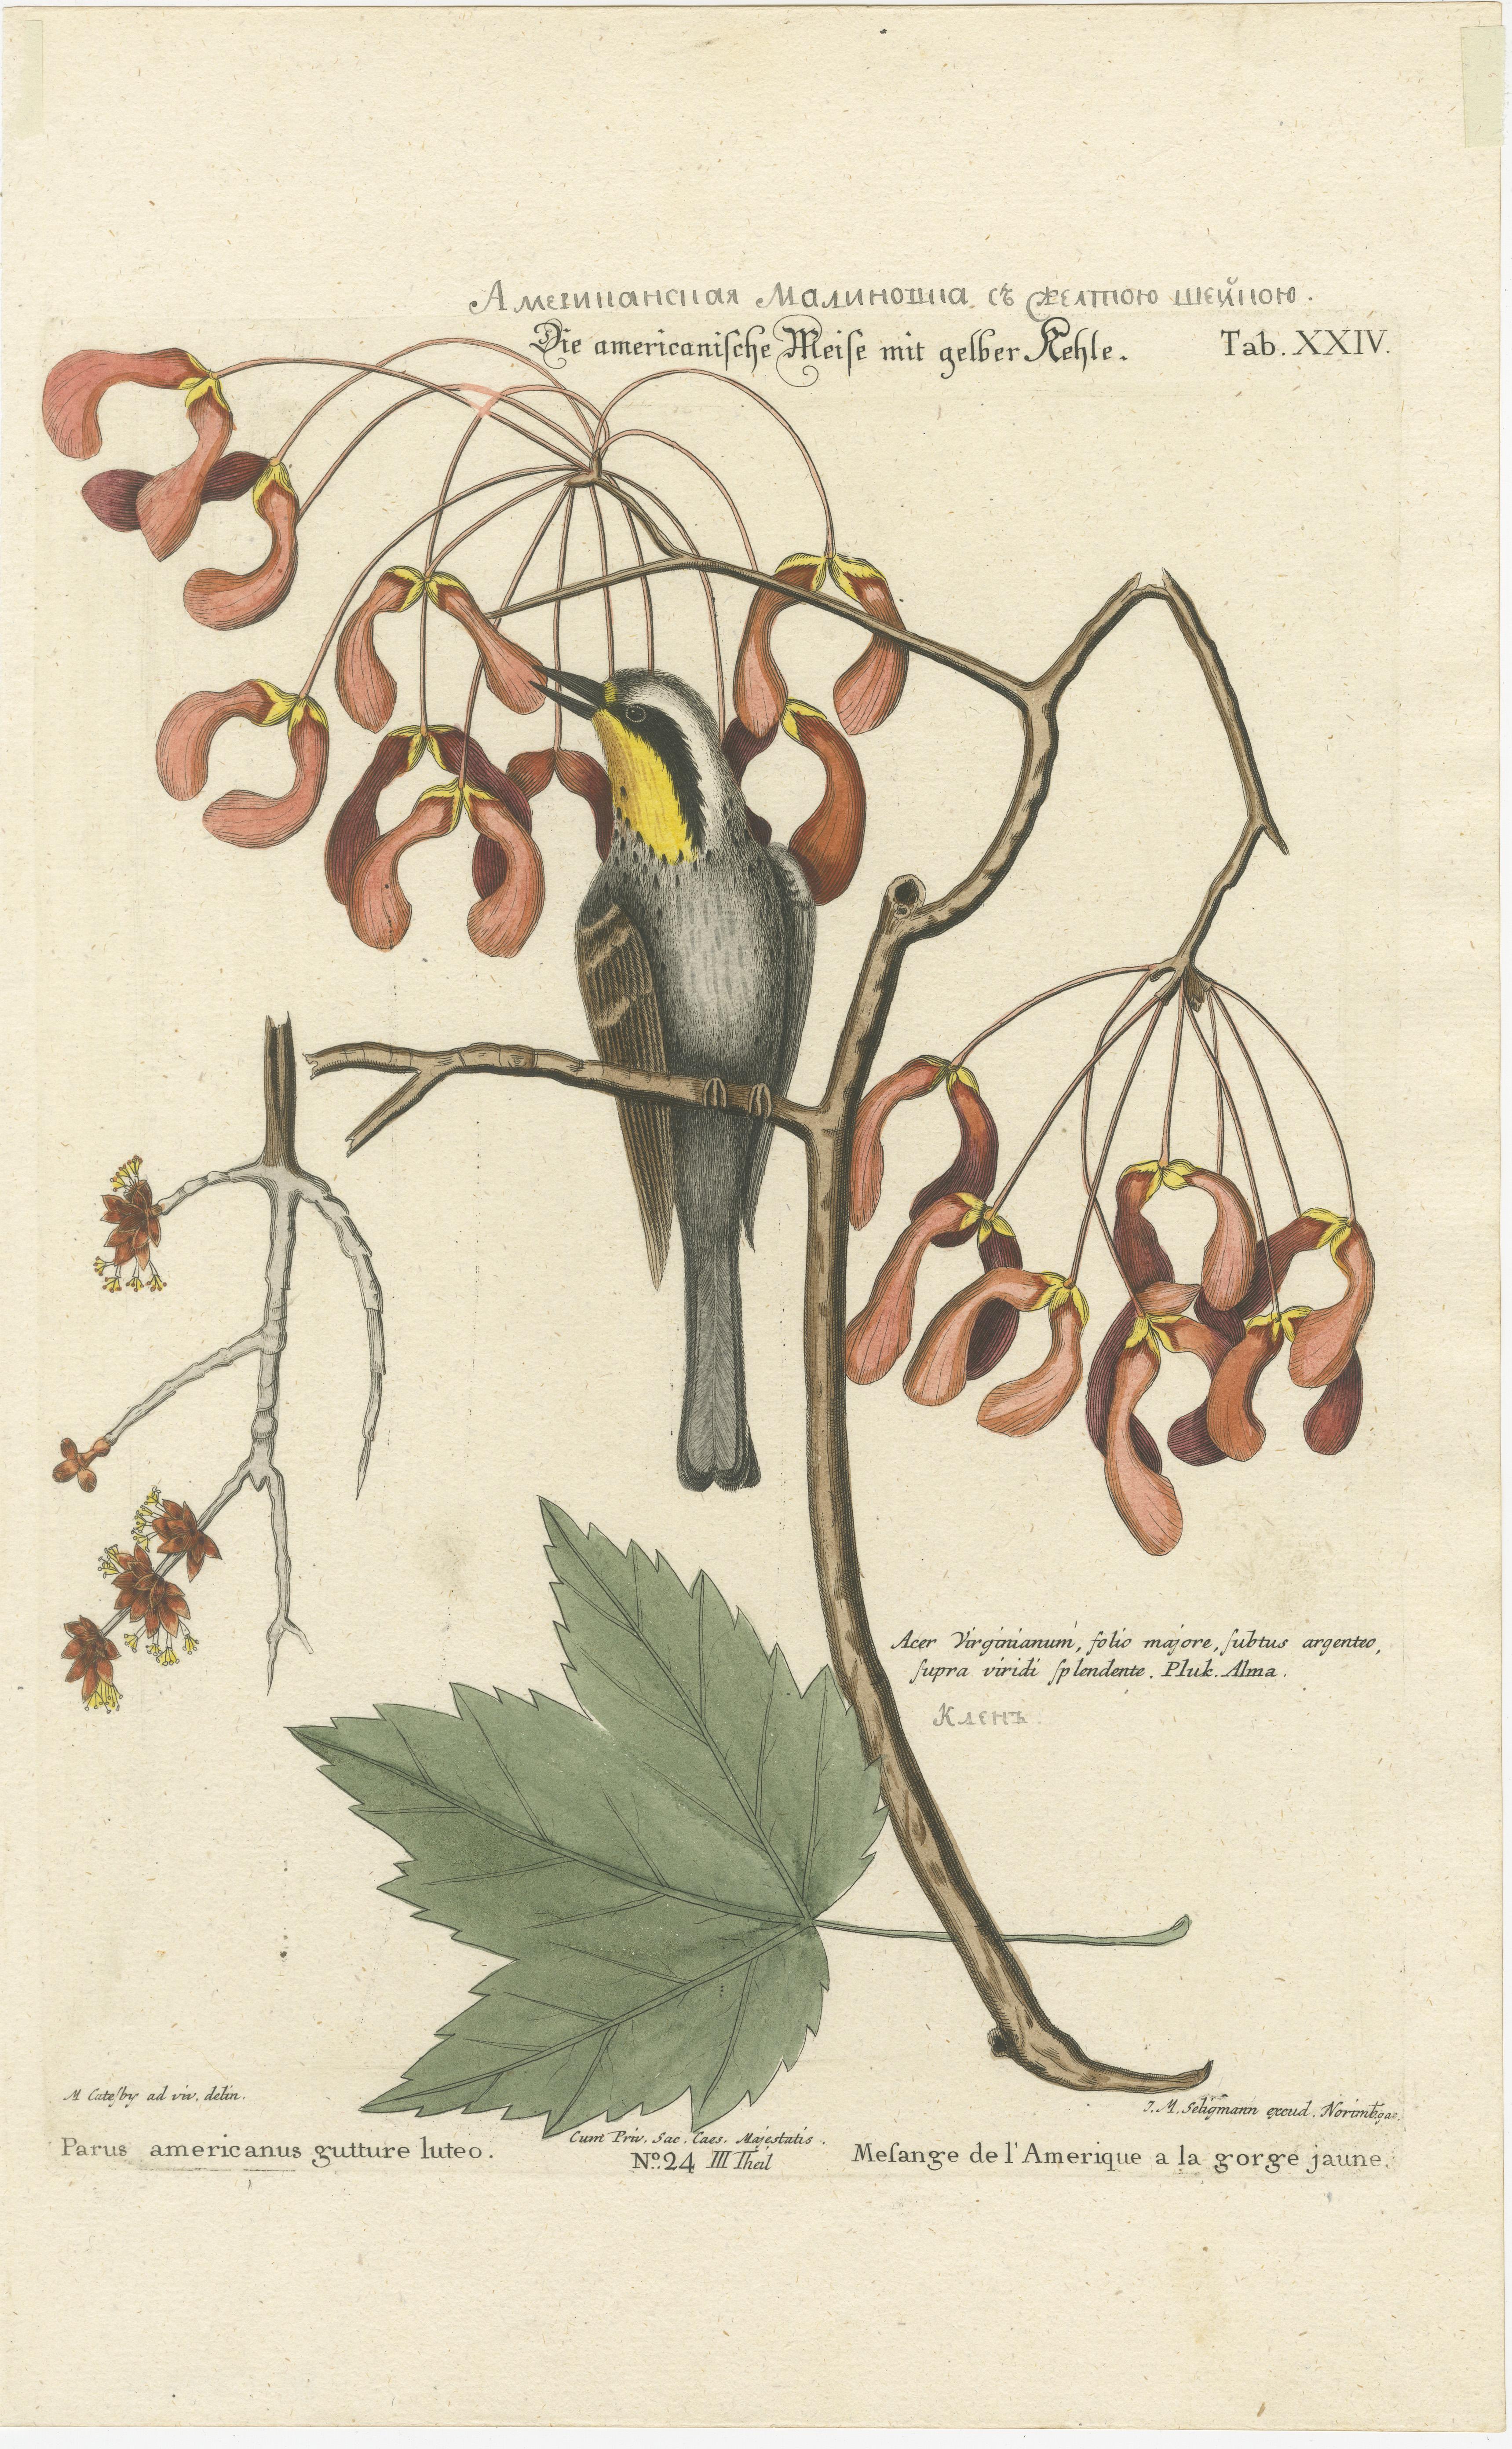 The image is an ornate botanical and ornithological illustration from one of Johann Michael Seligmann's collections, which were based on George Edwards's natural history studies.

The bird depicted in the image is identified with the Latin name